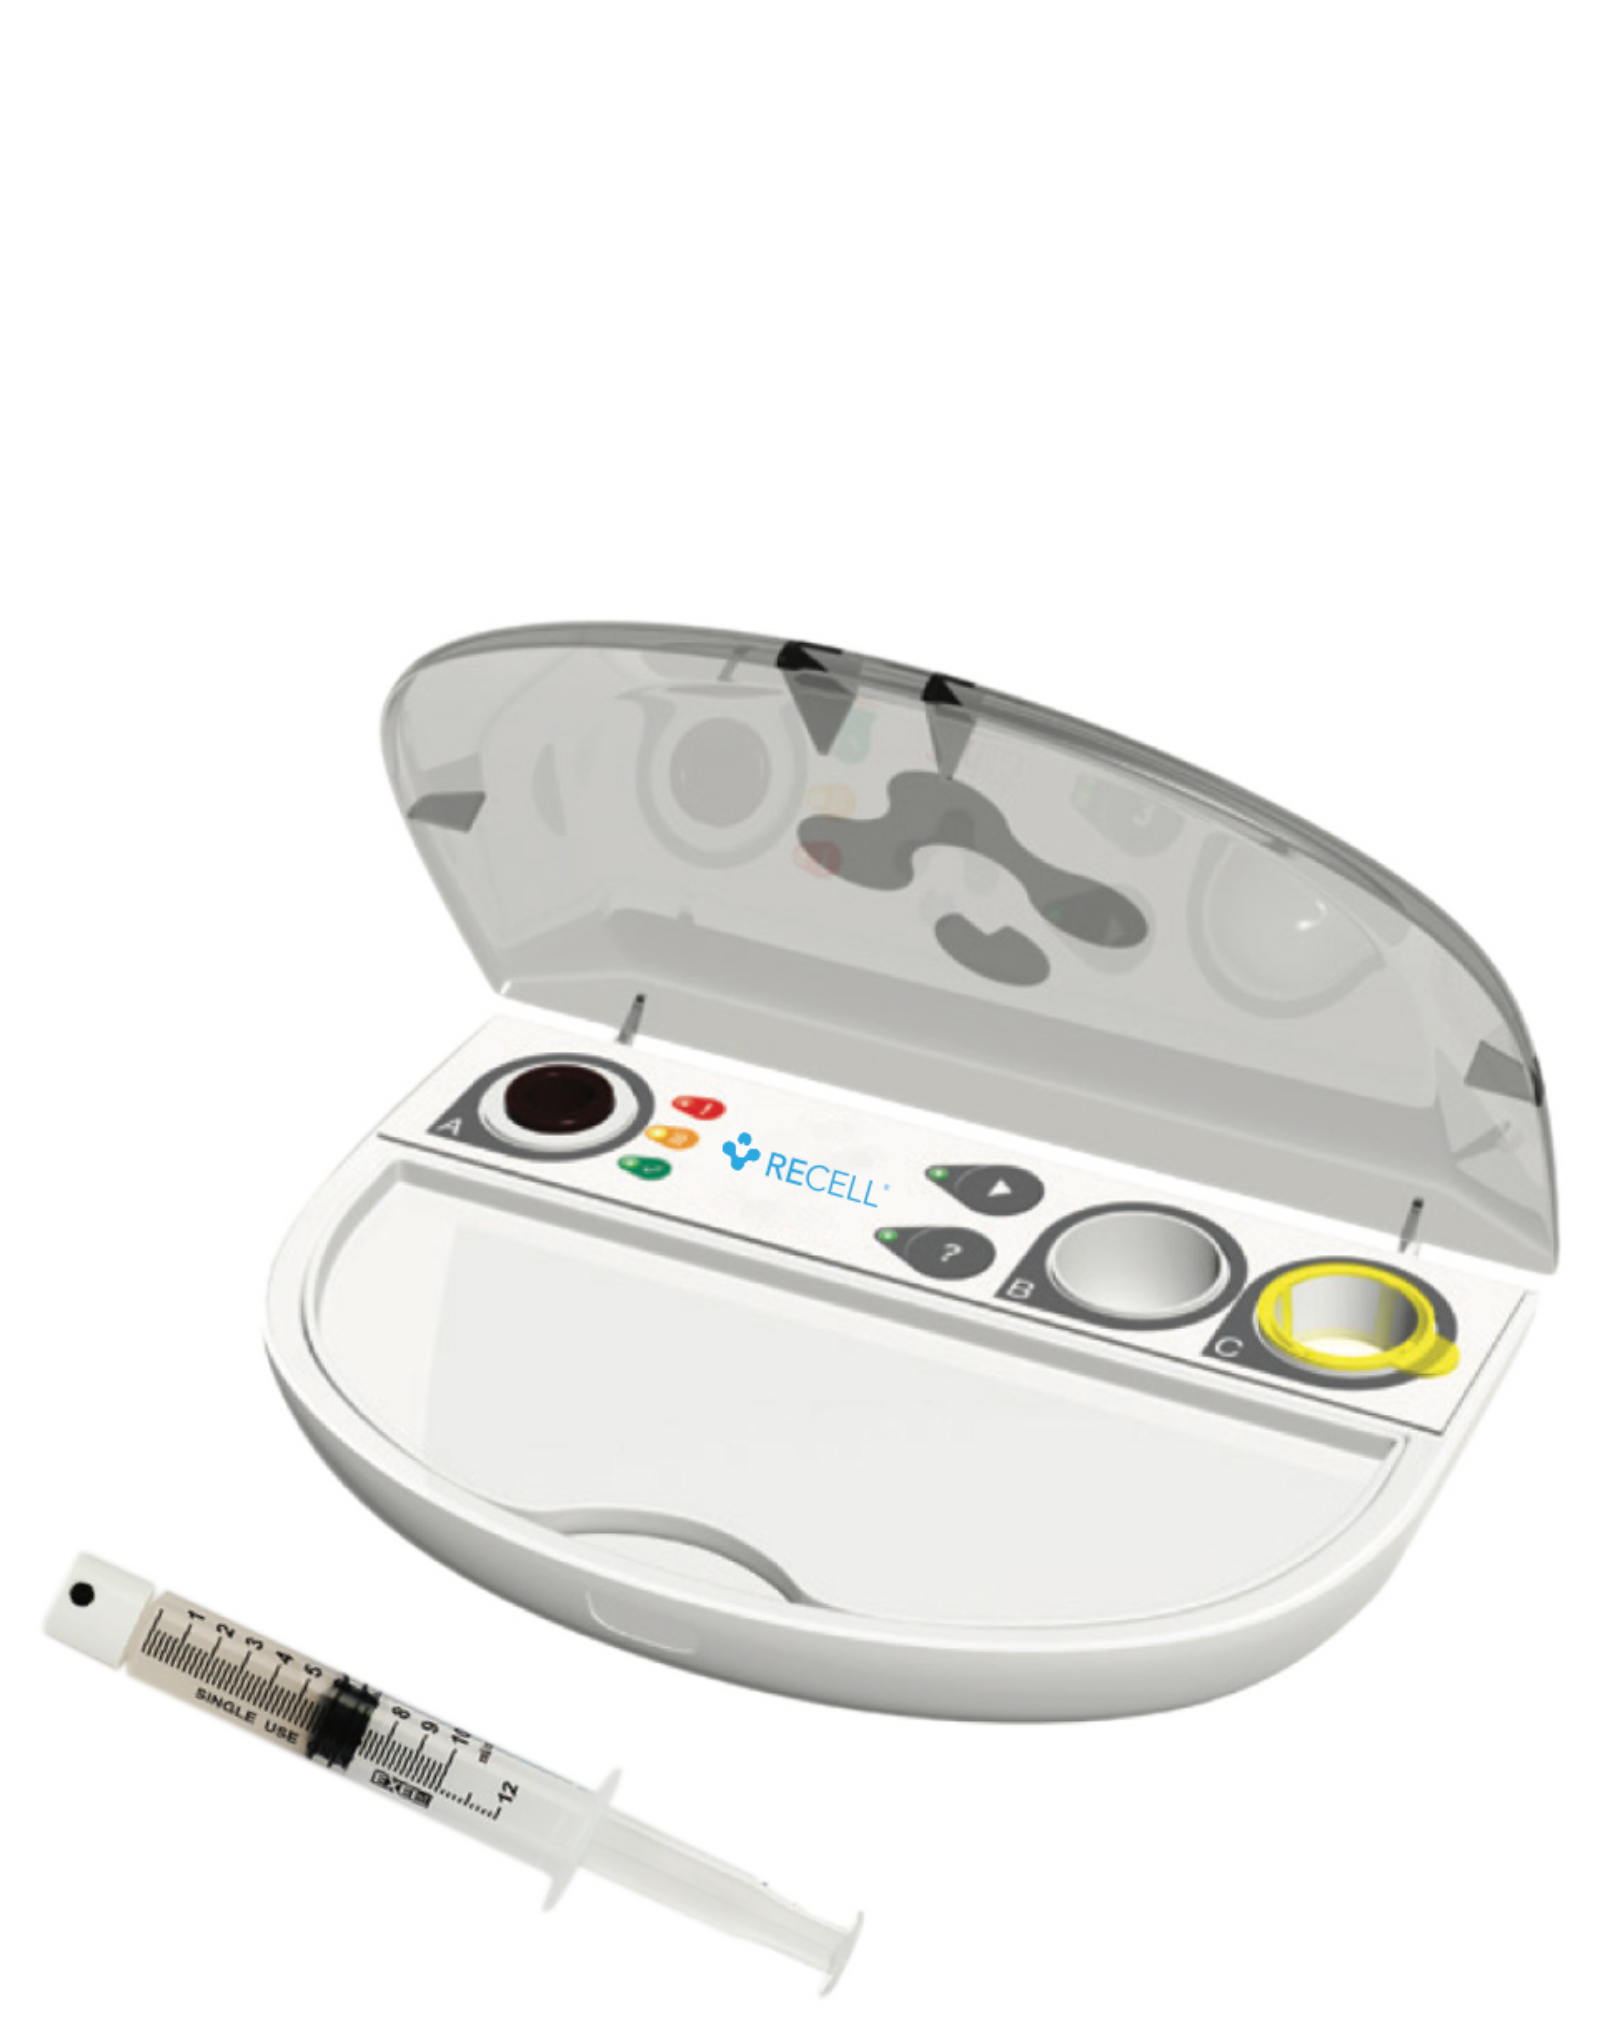 RECELL device logo stack